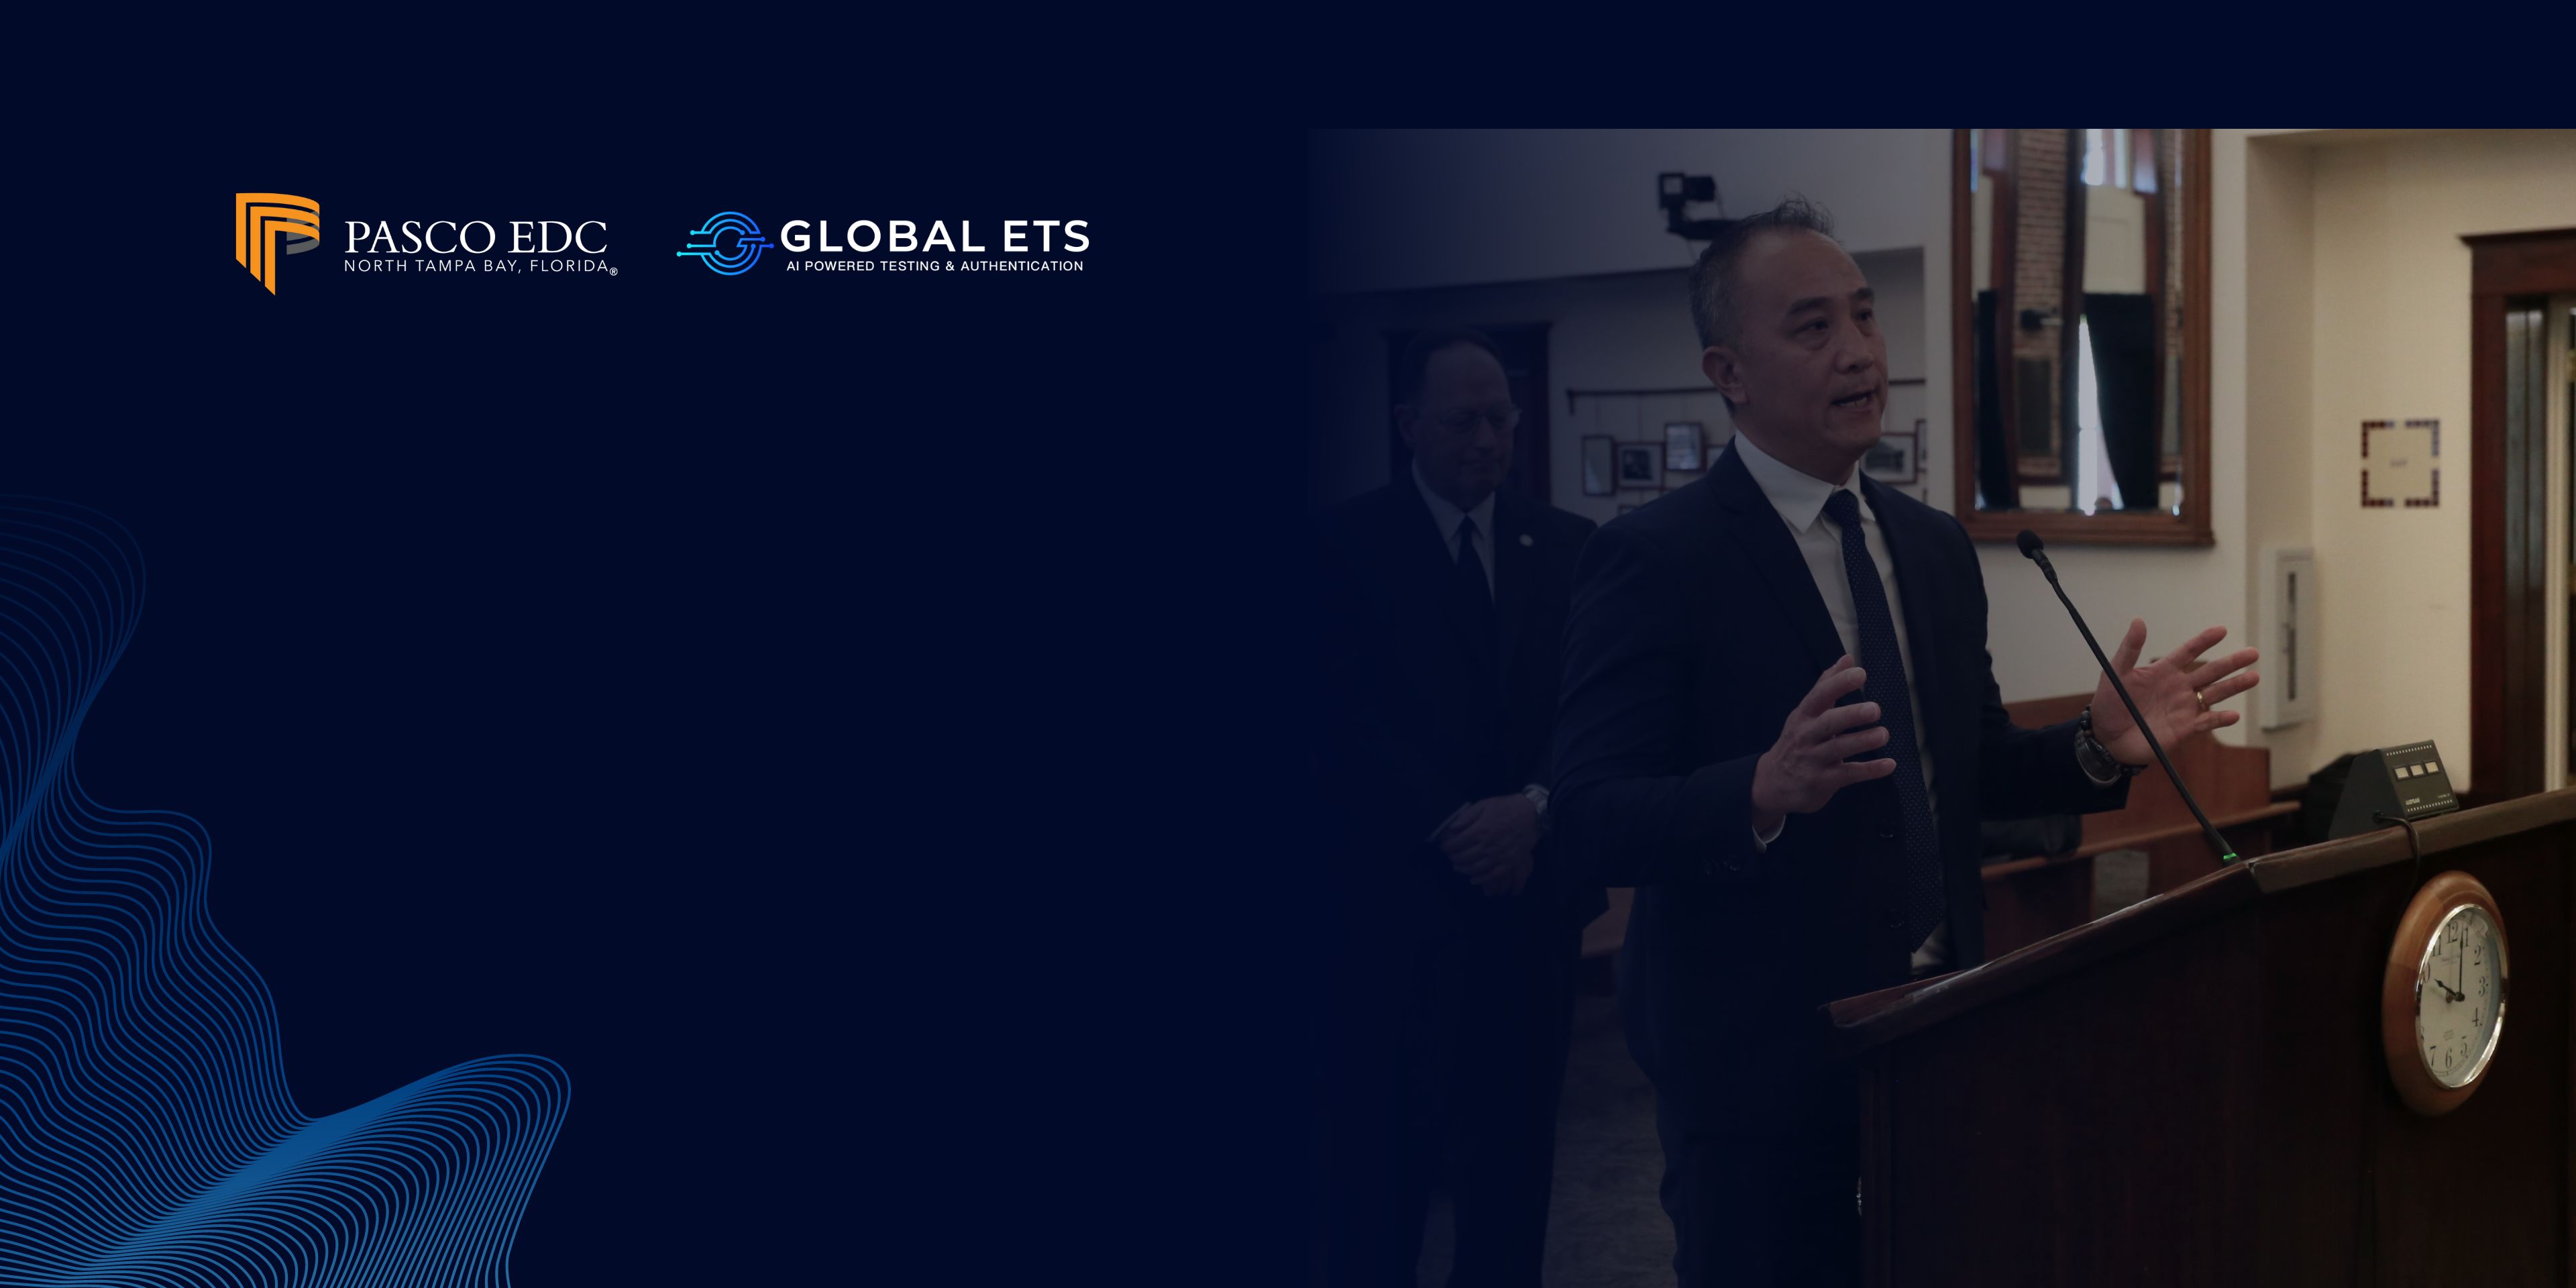 CEO of Global ETS, Dan Tang, in a dark suit is speaking at a podium in a room with wood-paneled walls and a clock, with the logos of Pasco EDC and Global ETS visible on a dark blue background with a wave-like design on the left side of the image.